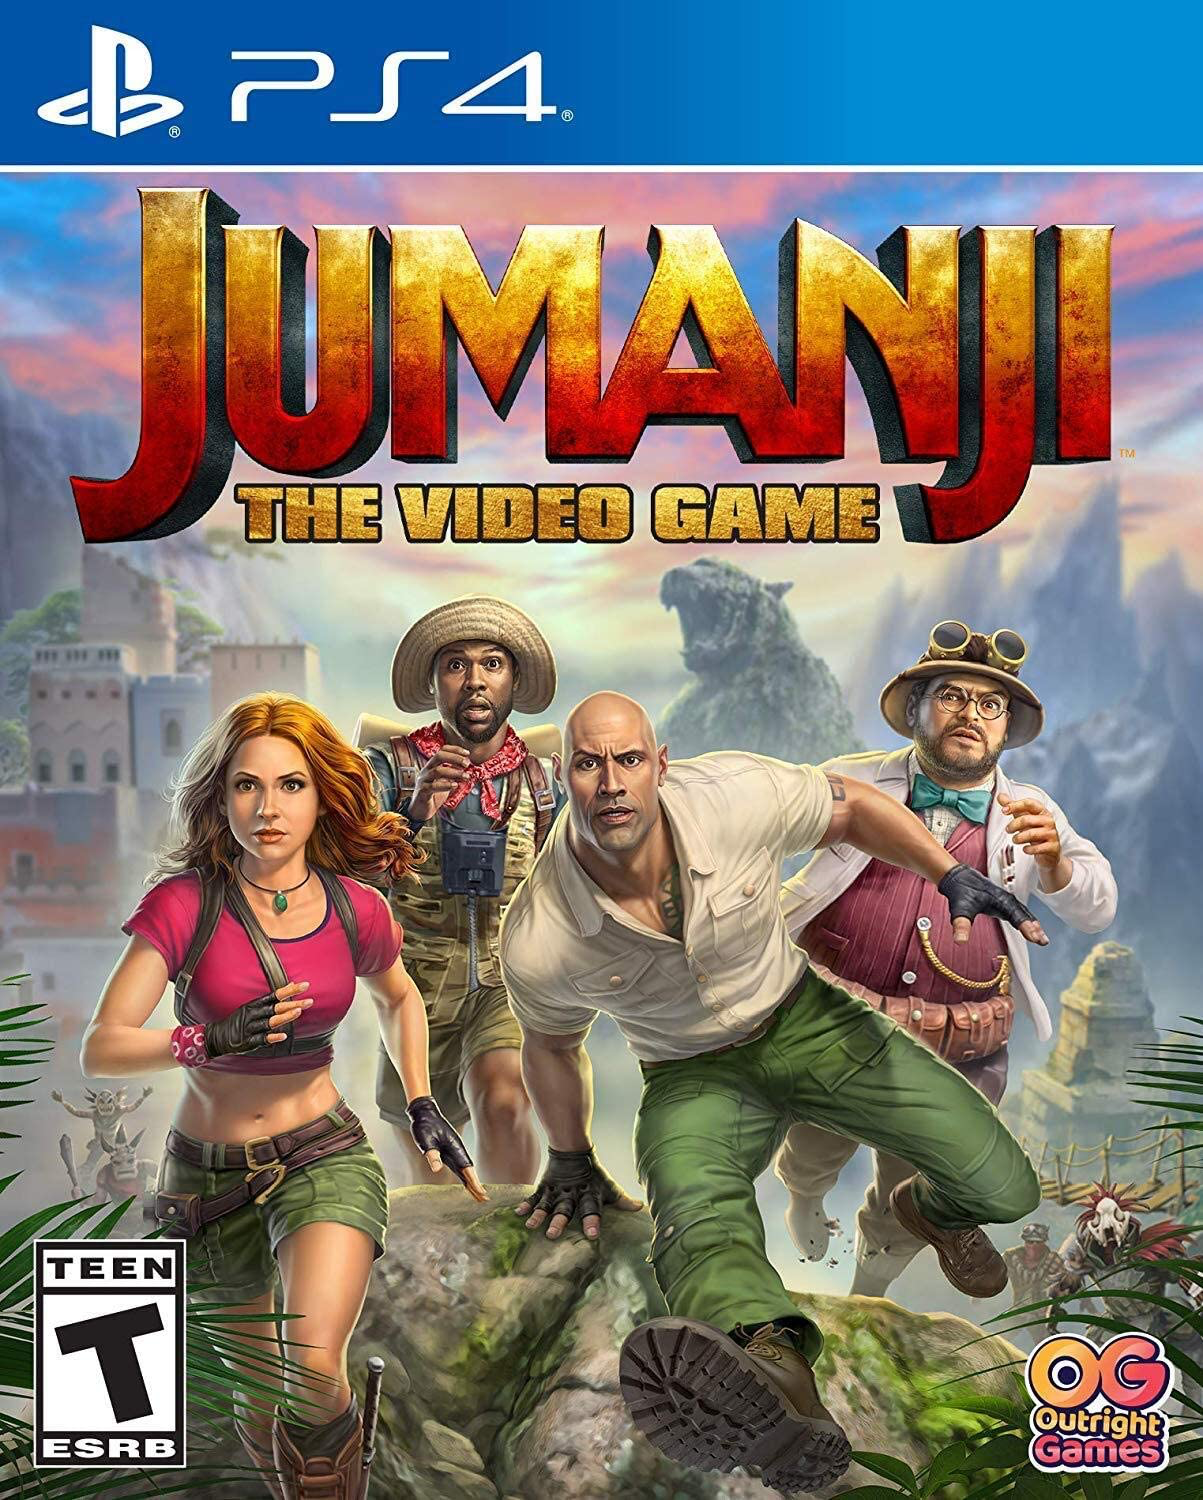 Jumanji The Video Game Codex Gamicus Humanity S Collective Gaming Knowledge At Your Fingertips